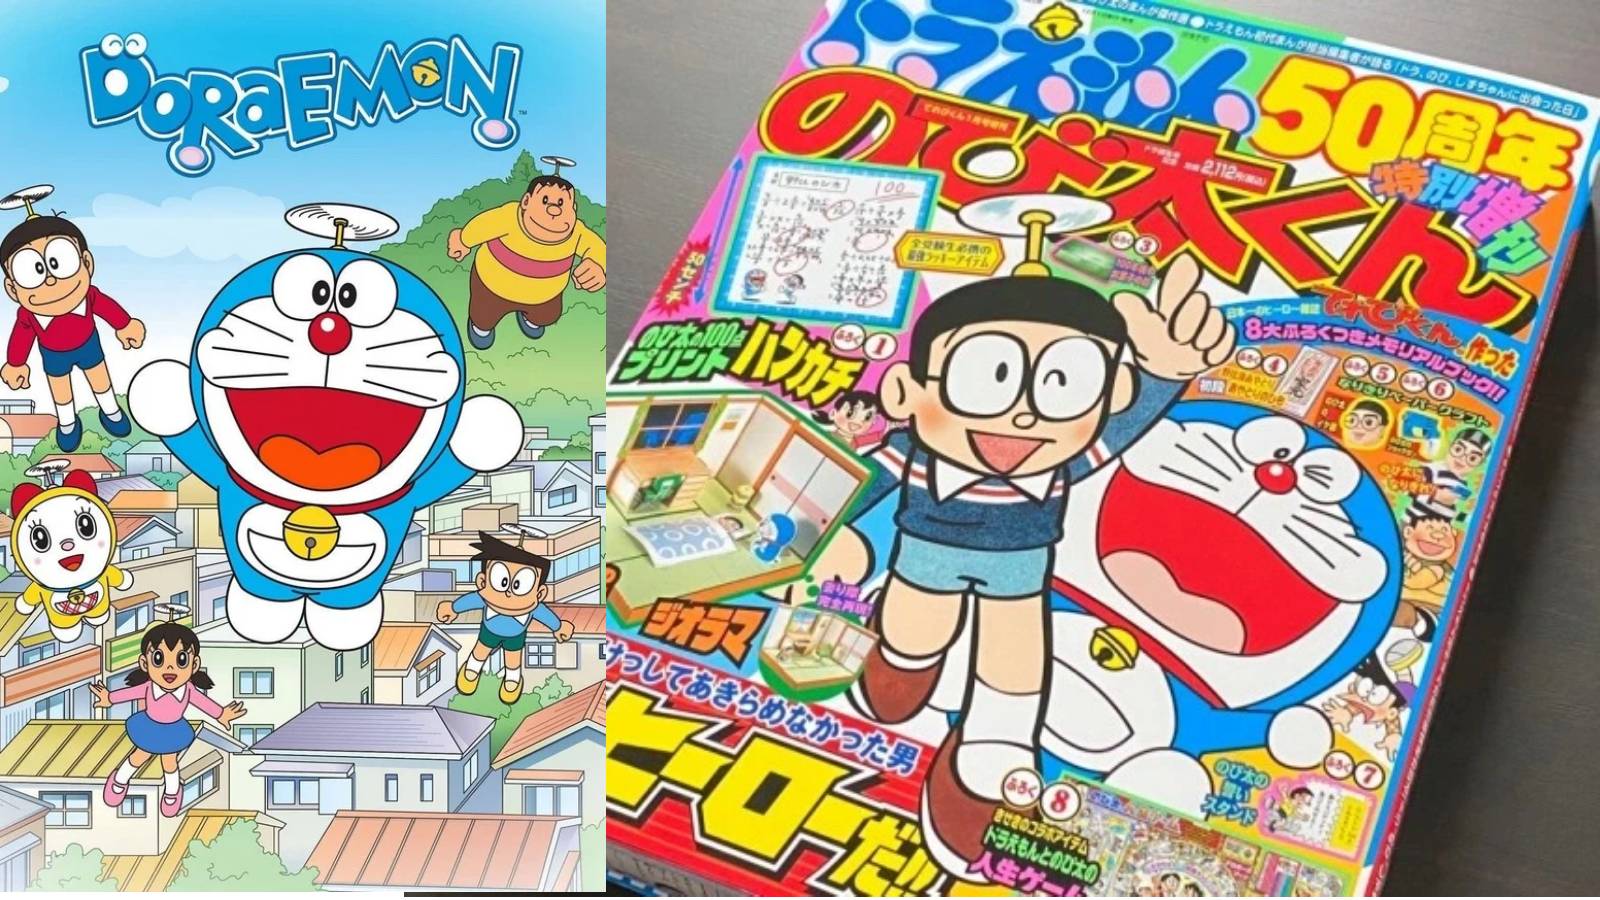 Remember waking up early on weekends just to watch Doraemon?